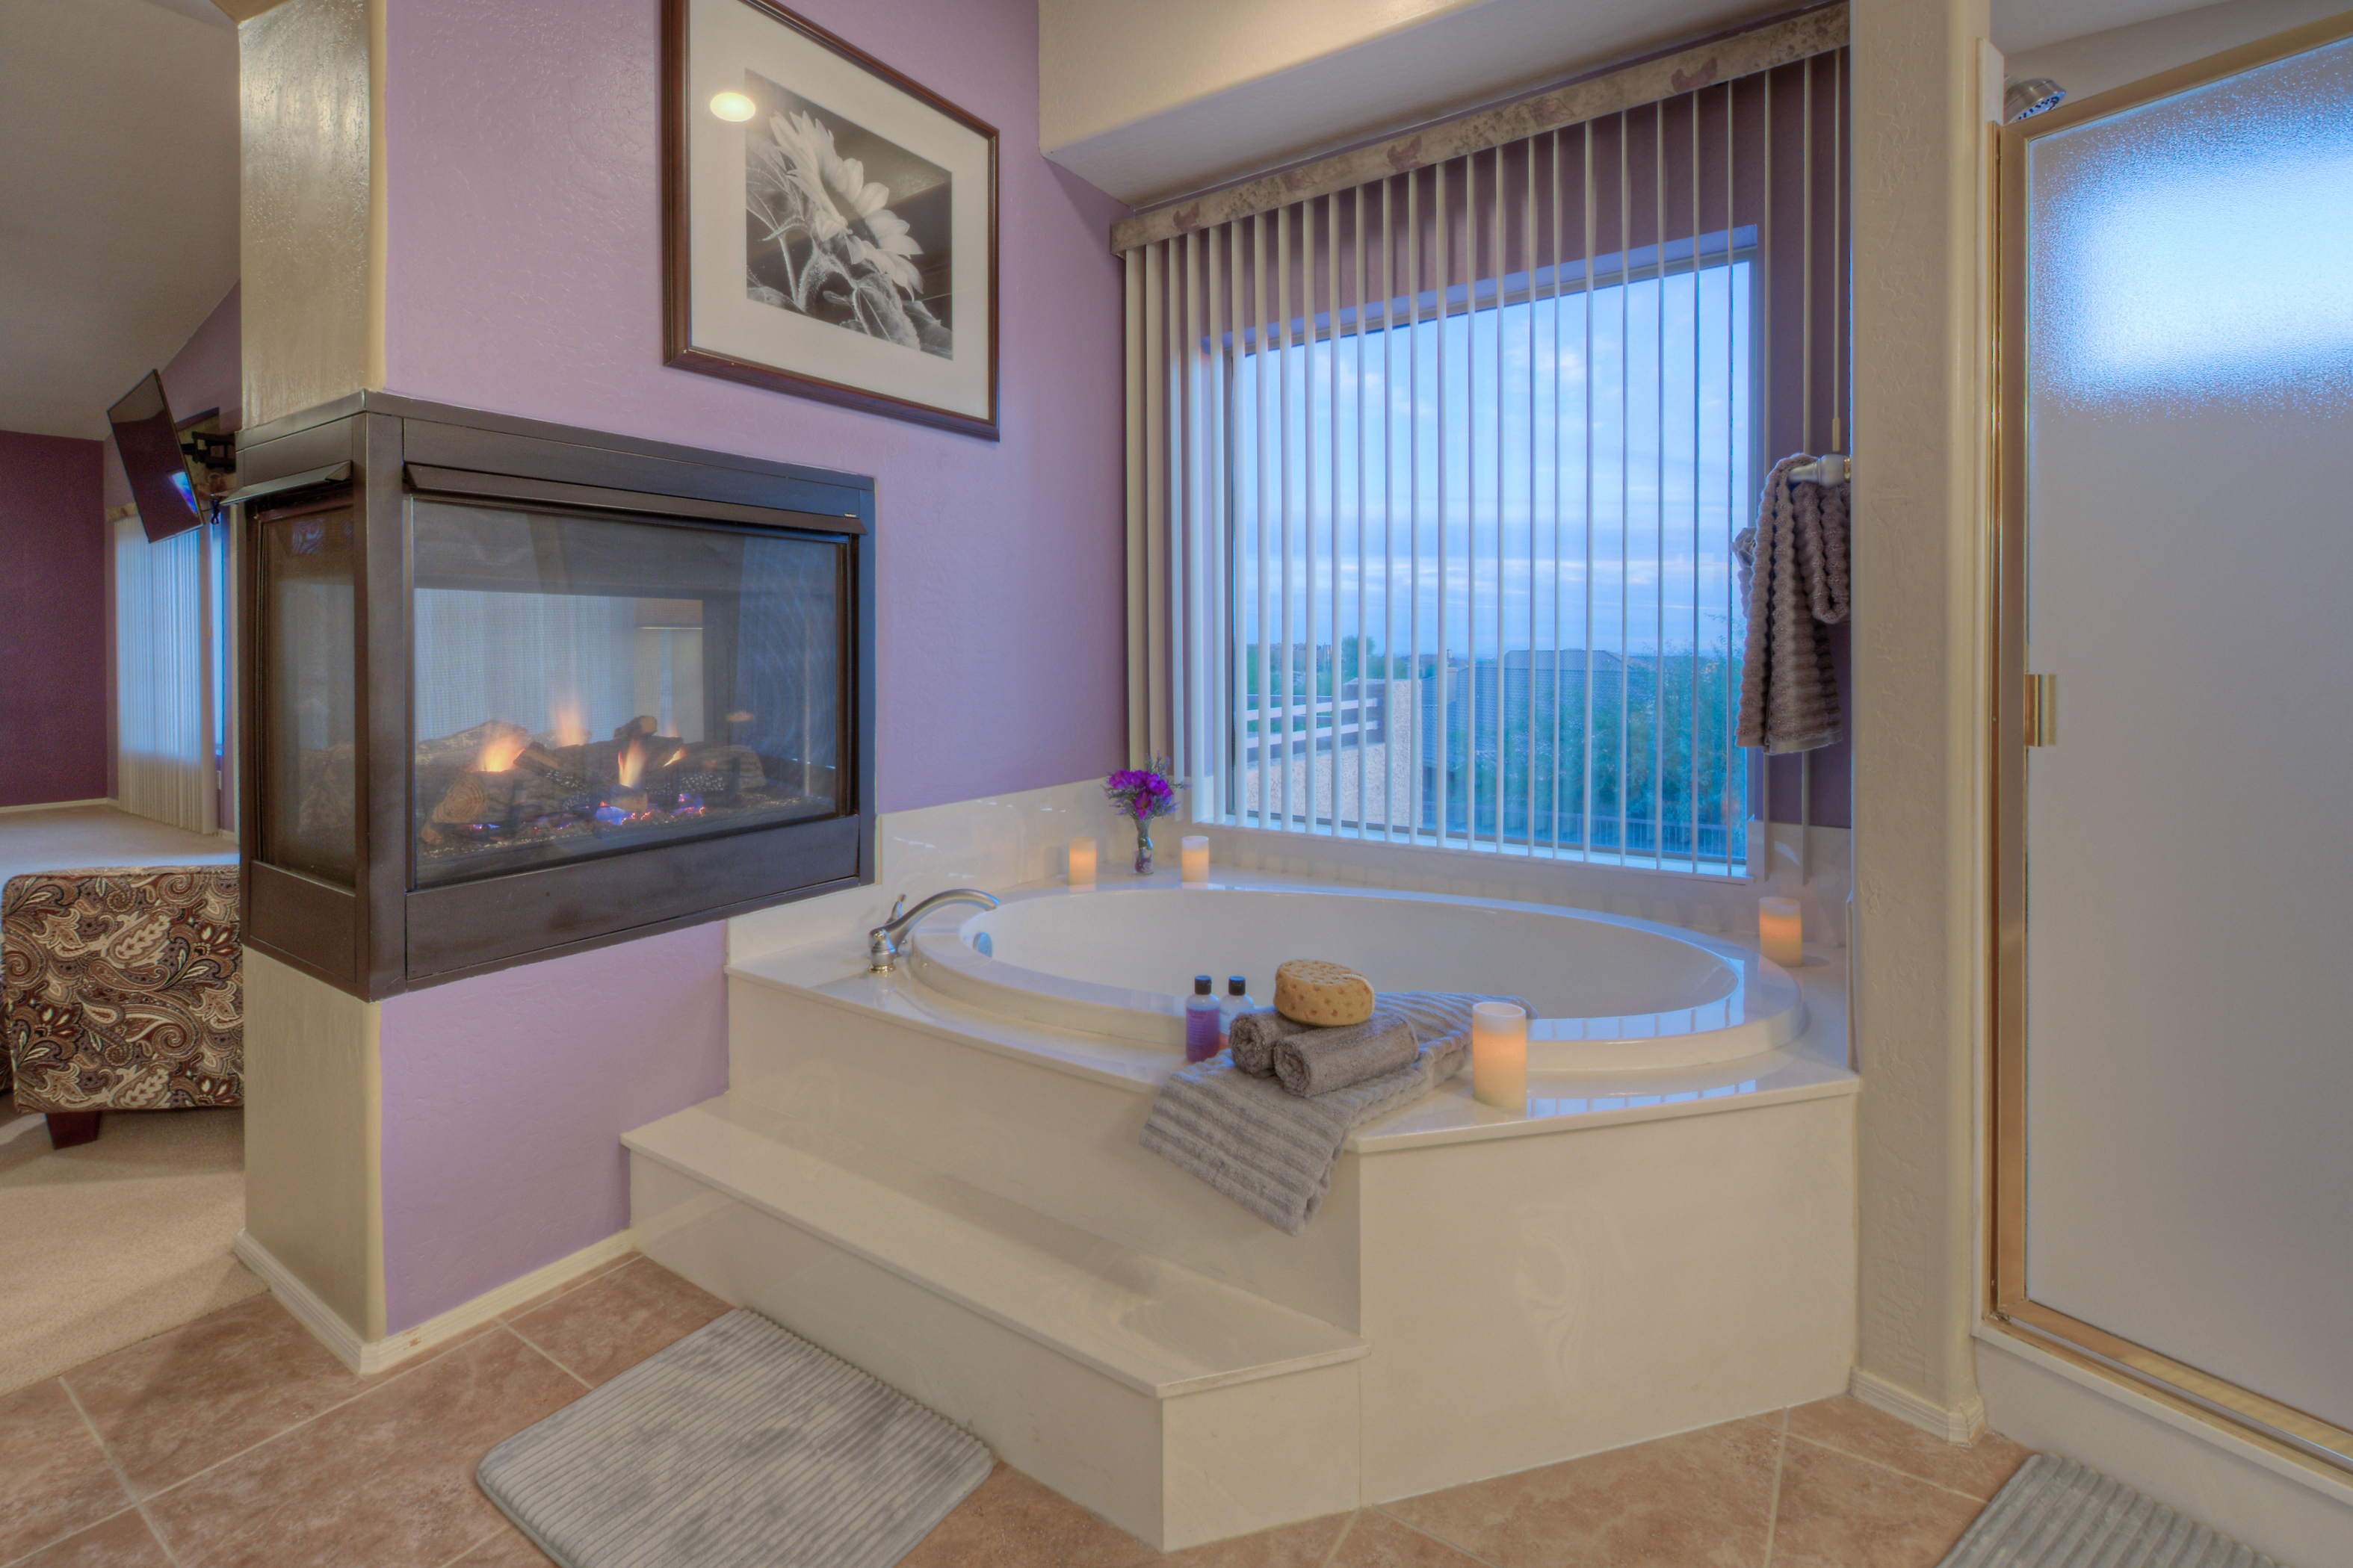 Ensuite primary bath has a double sided fireplace and sumptuous garden tub.